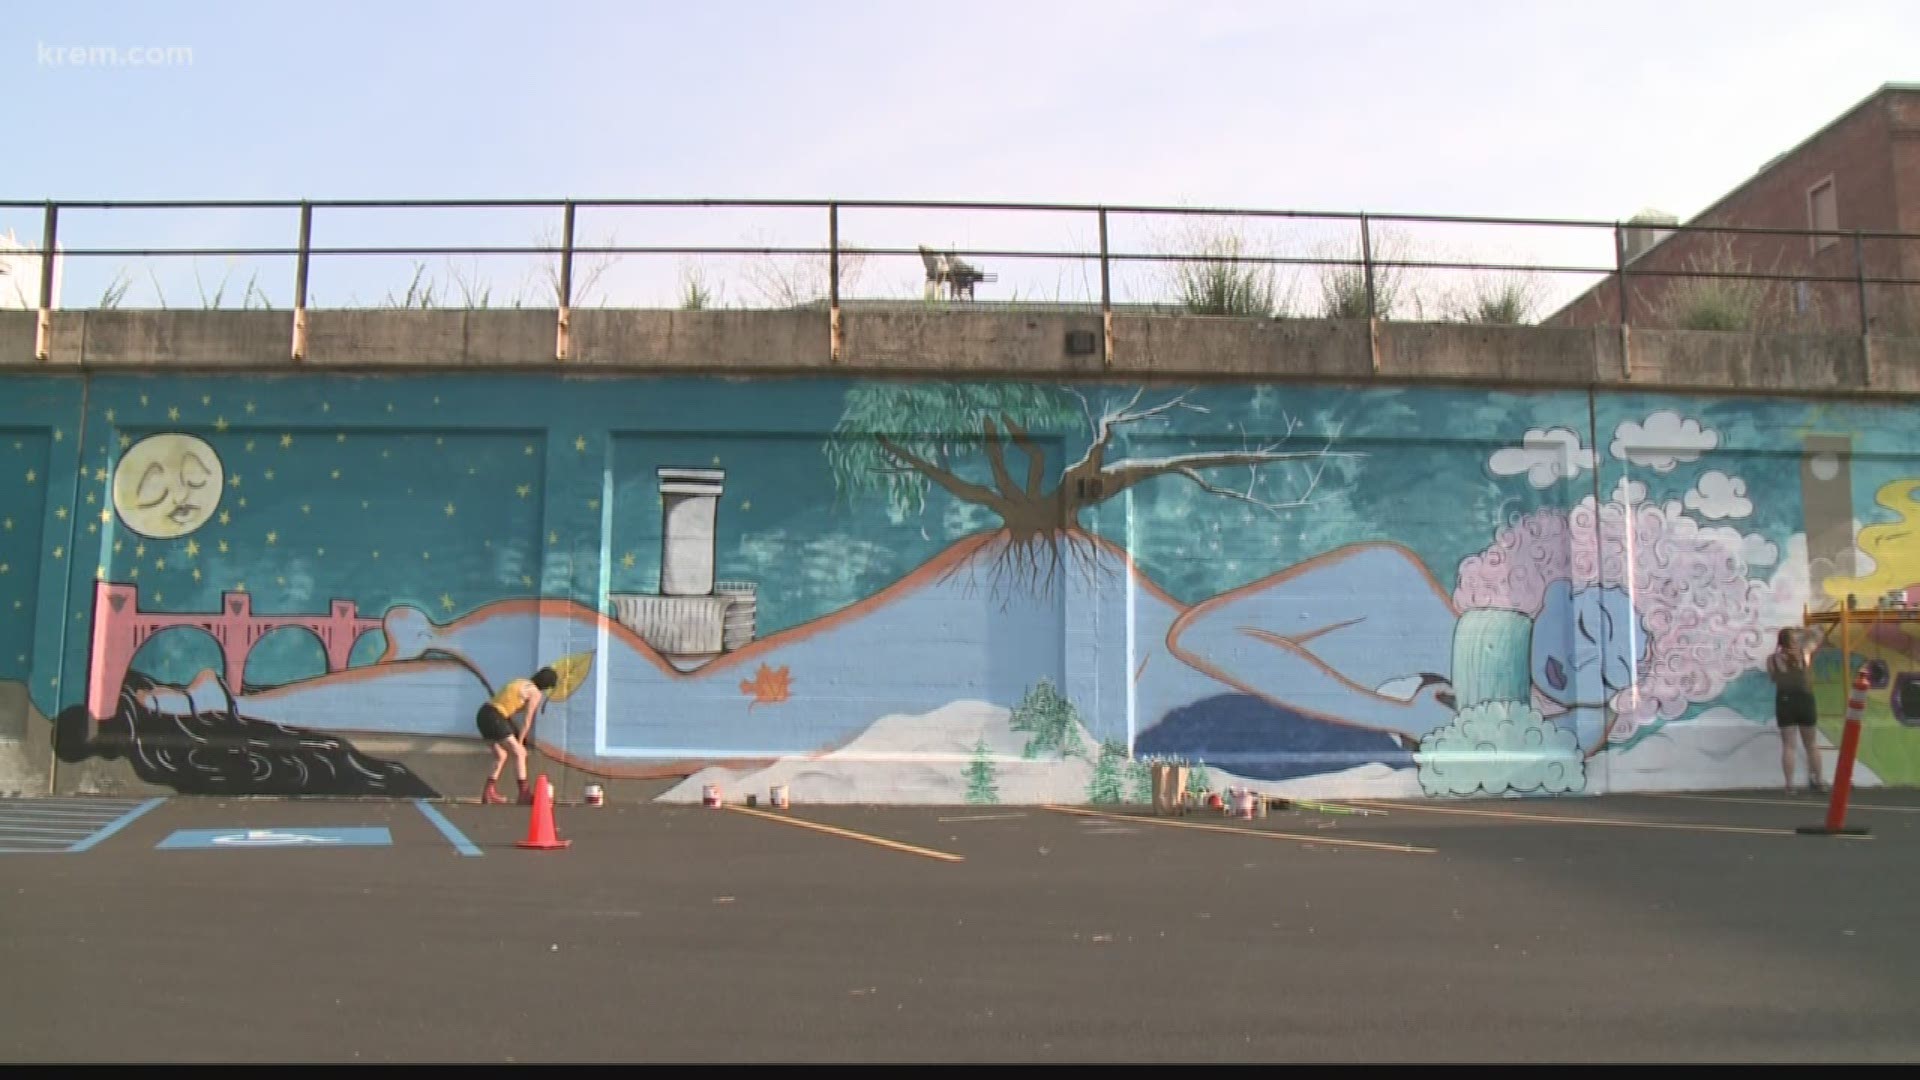 KREM Repoter Alexa Block met with artists Susan Webber and Shelby Allison  to speak about their mural work around Spokane, including one on First Street.